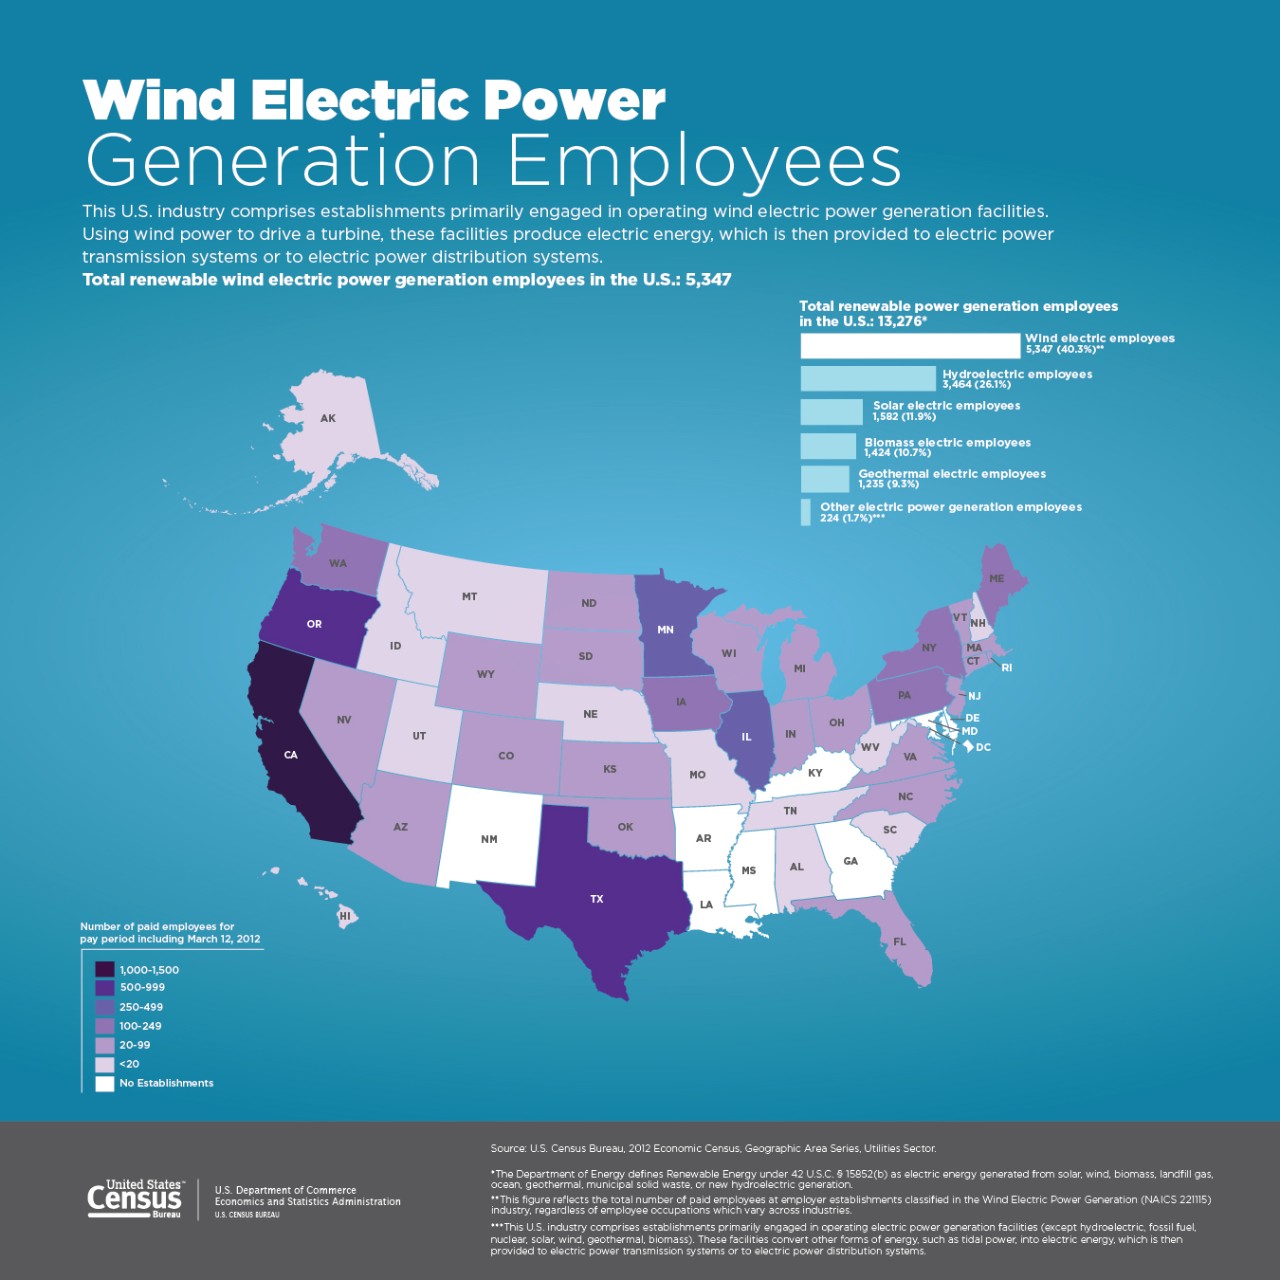 Wind Electric Power: Generation Employees